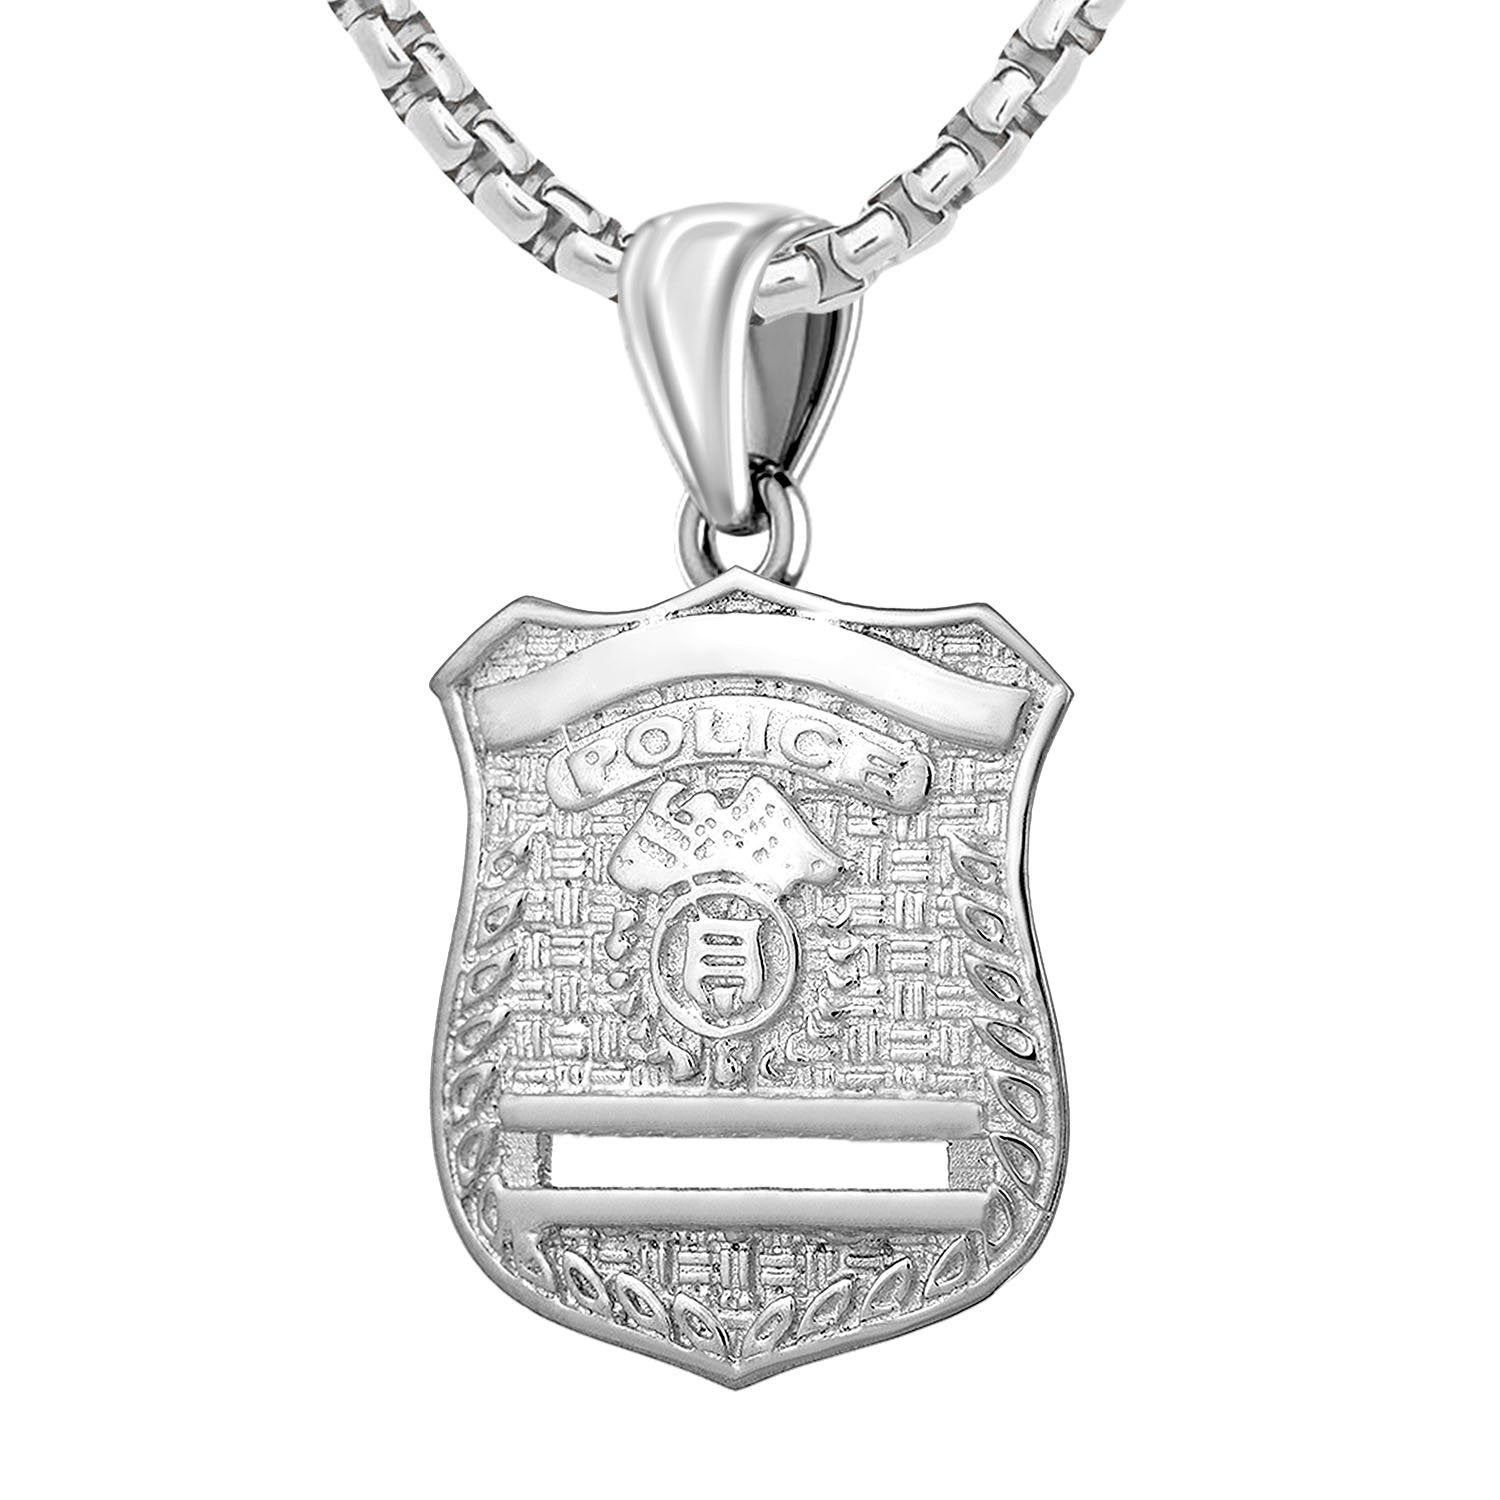 Police Badge Necklace In Silver - 2.6mm Box Chain